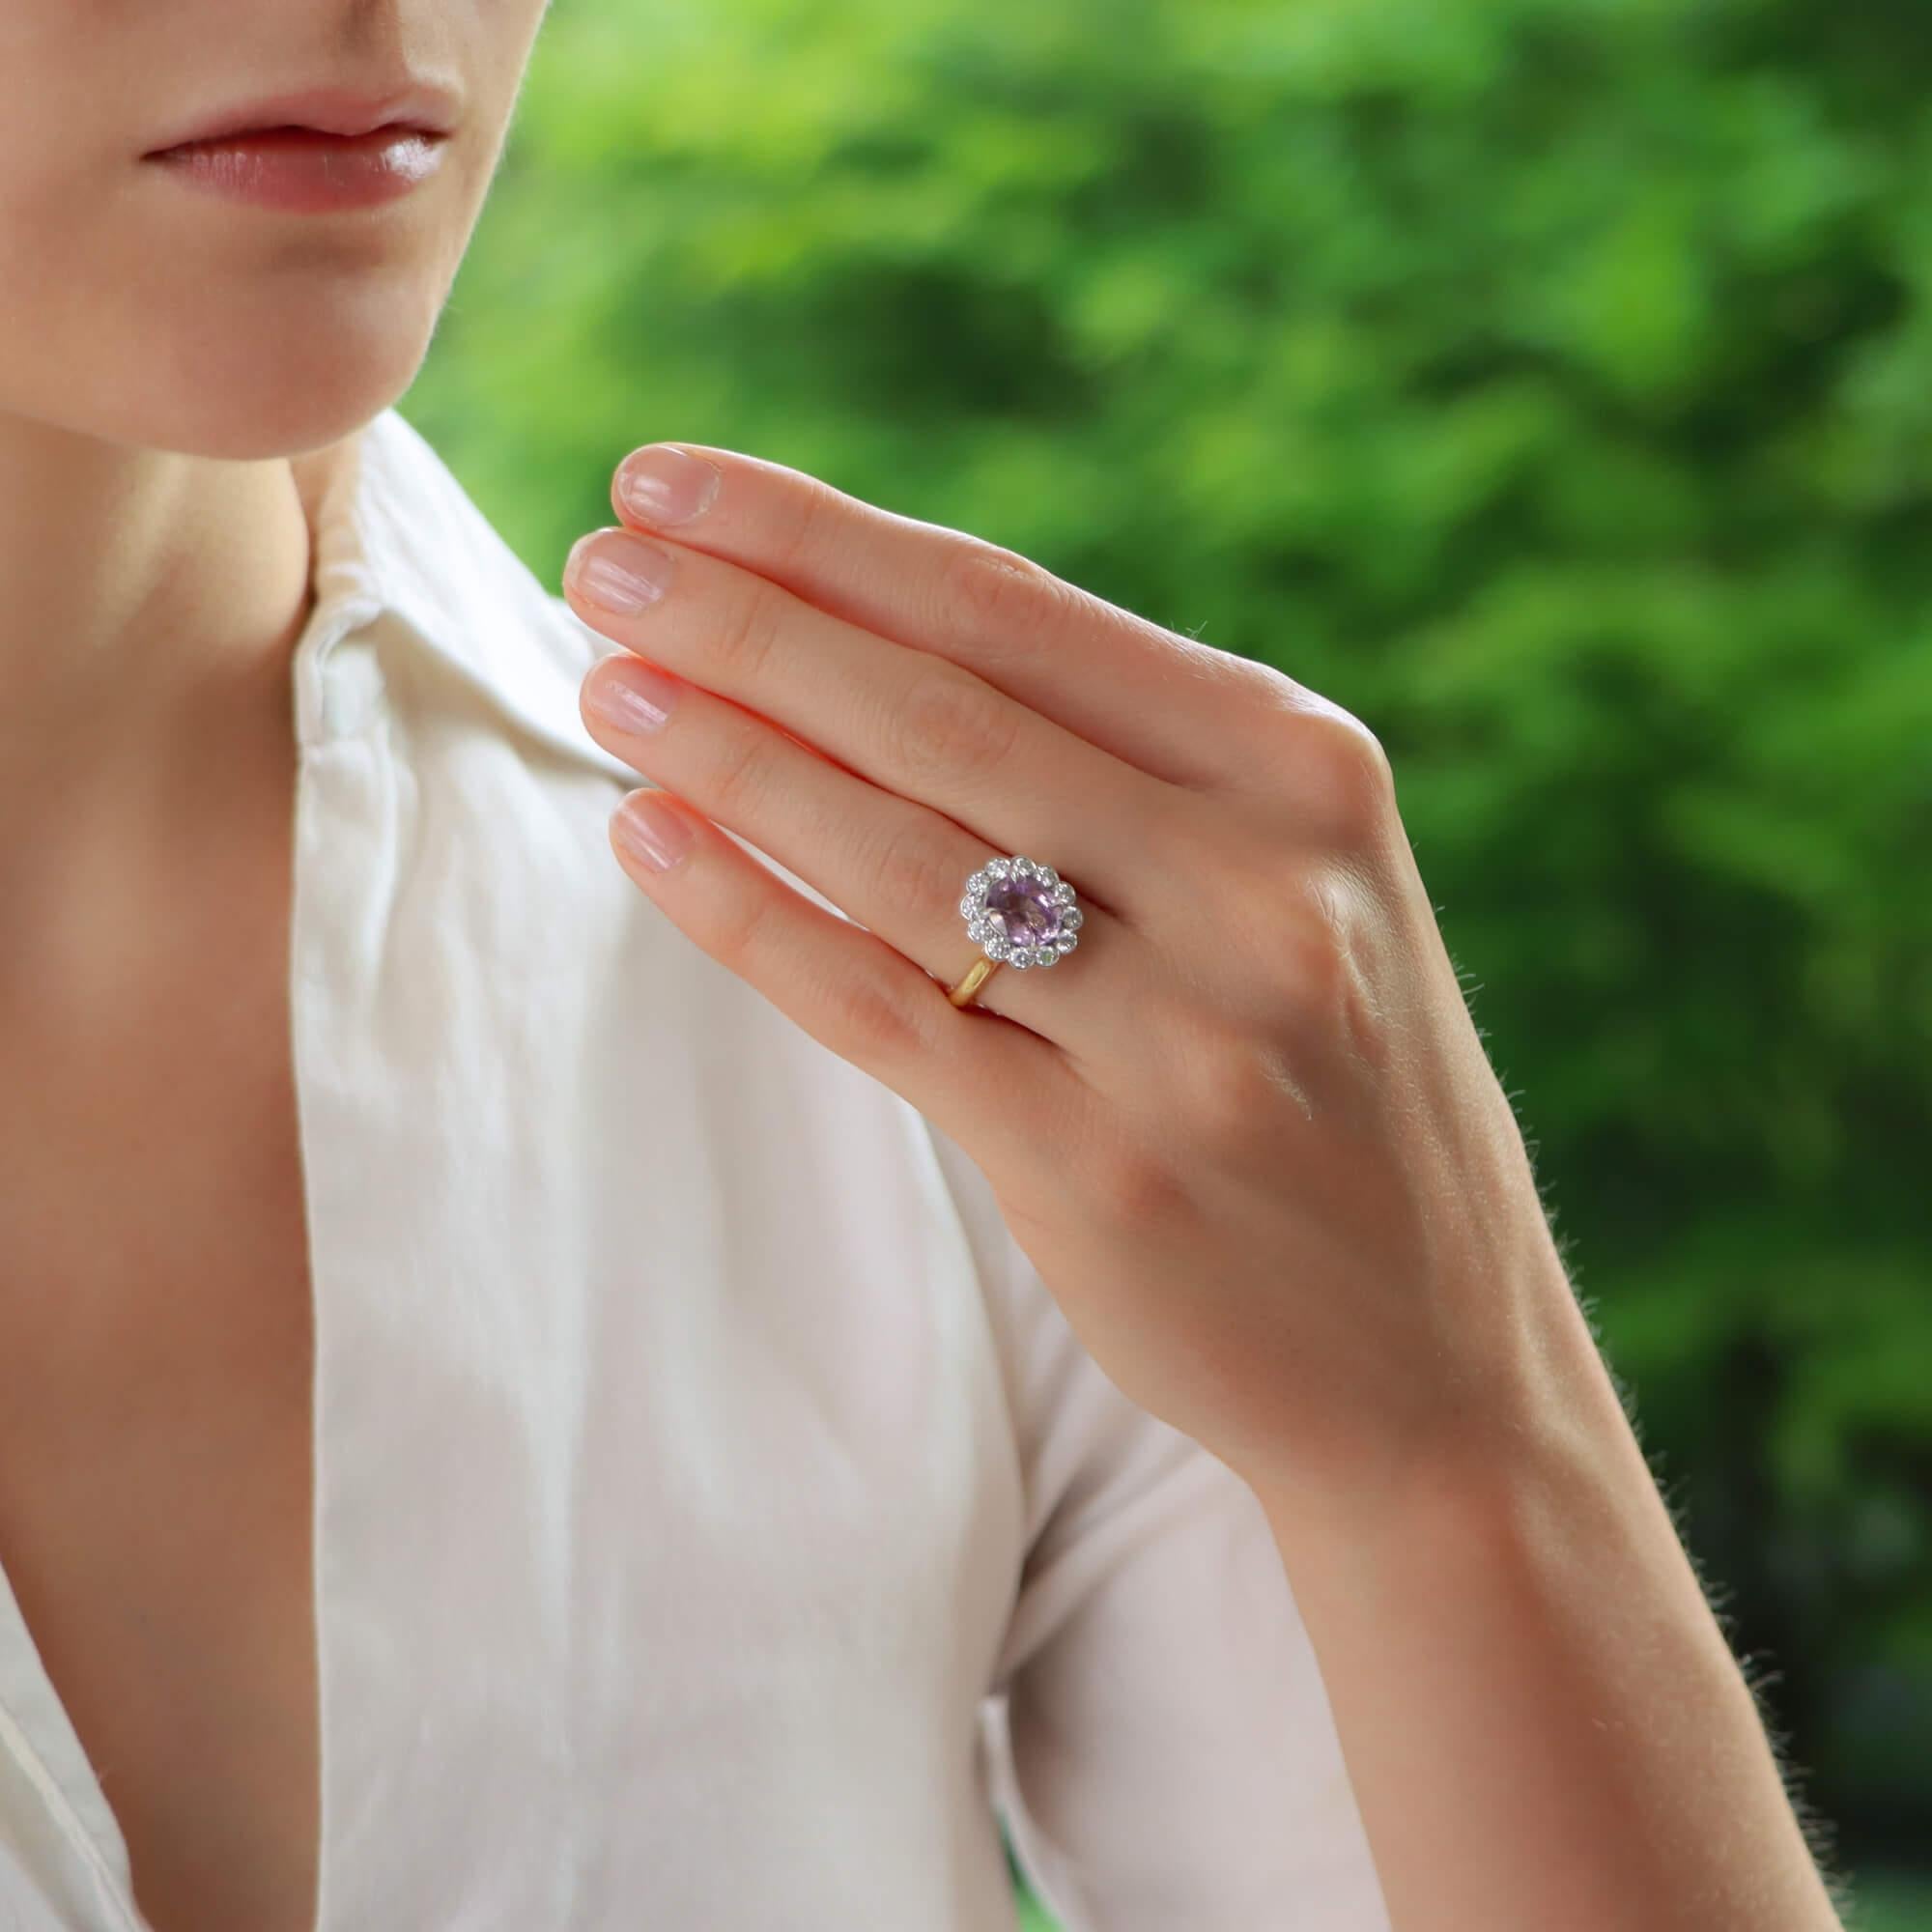  A truly stunning pastel pink sapphire and diamond cluster ring set in 18k yellow and platinum.

The piece is centrally set with a beautiful 2.59 carat oval cut pink sapphire which is claw set in platinum. The sapphire has a fantastic vibrant pastel